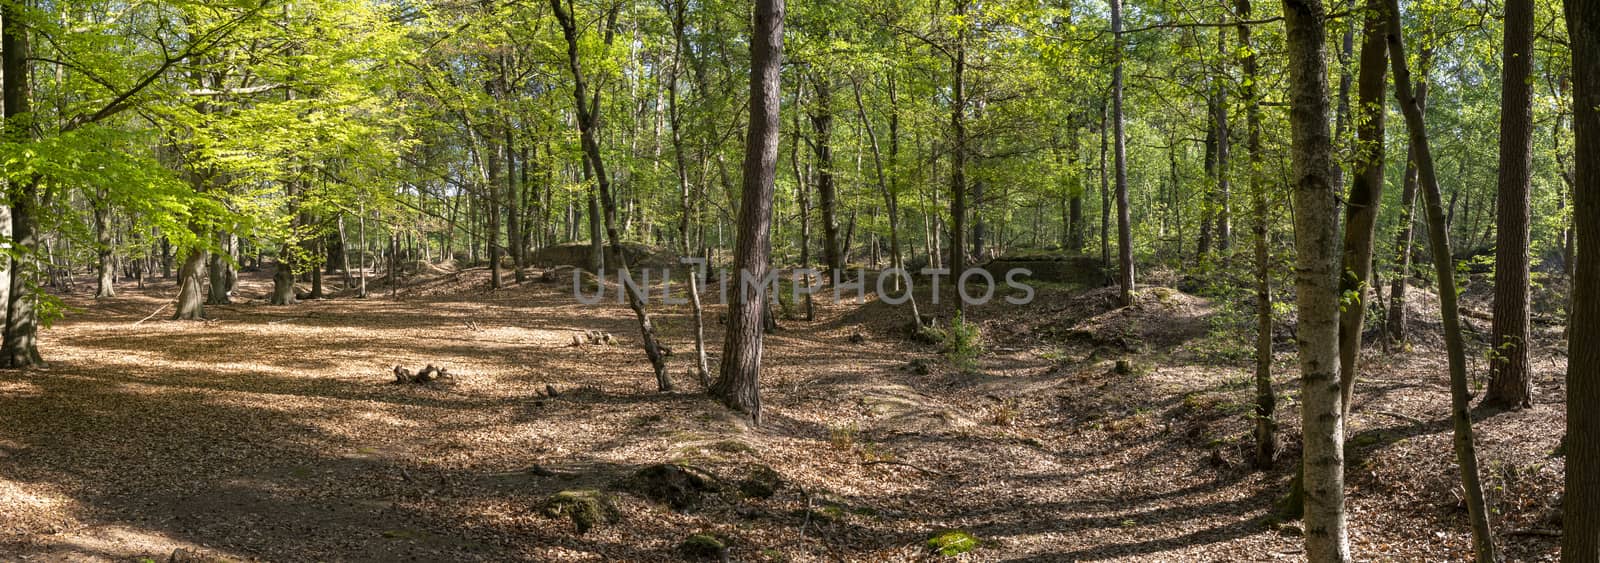 Panorama picture of Mastenbos in Kapellen, with German bunkers from WW1 by kb79